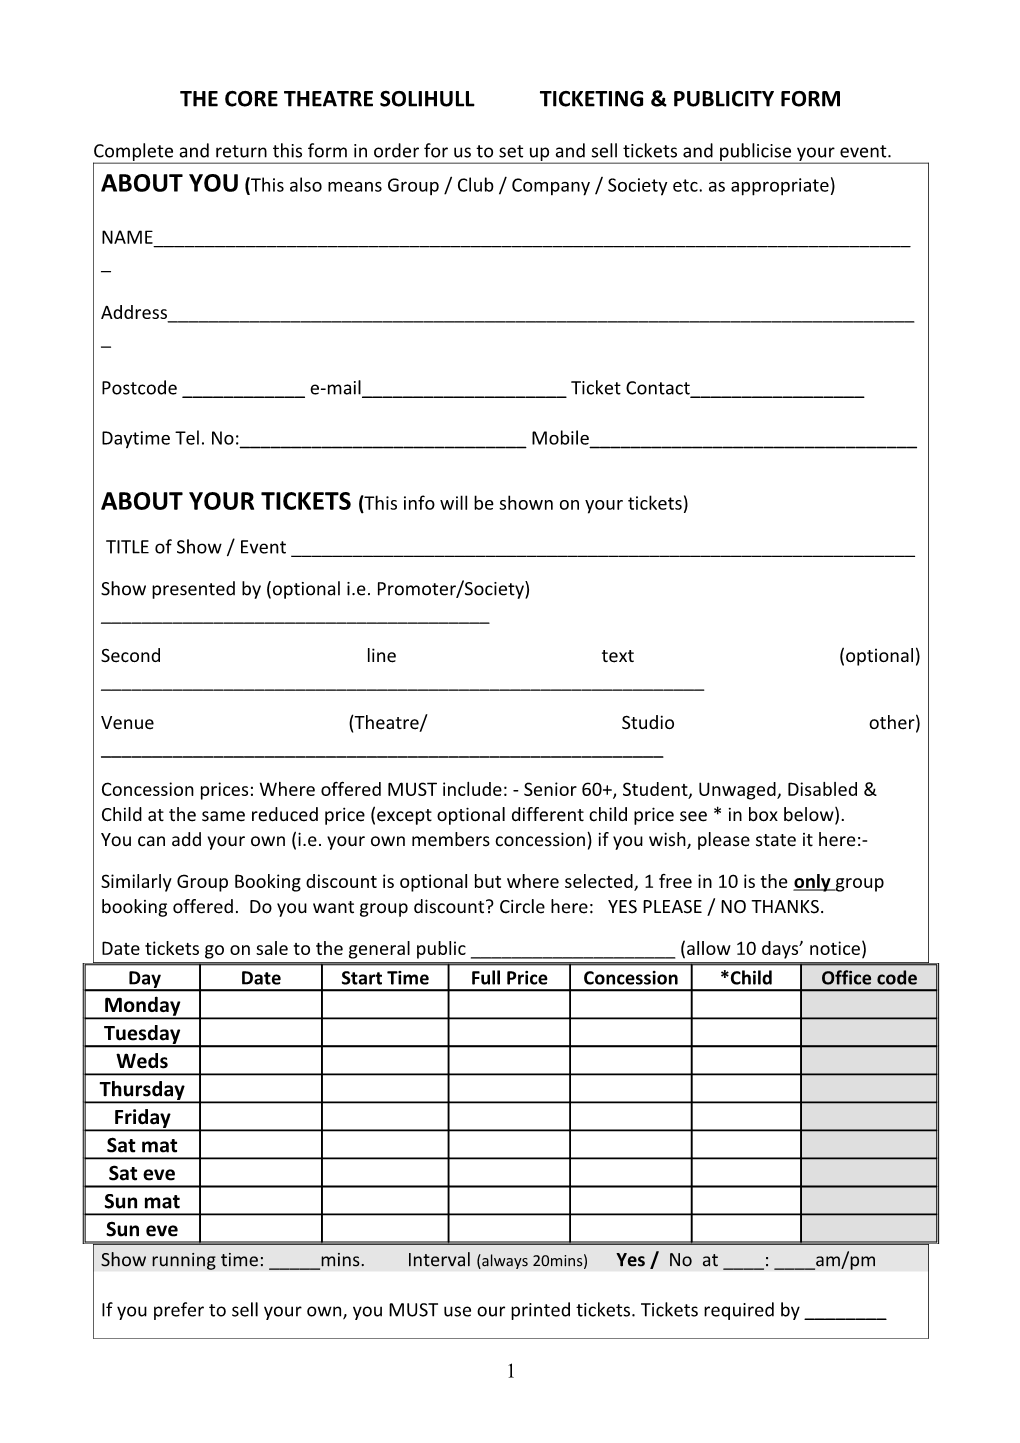 Solihull Arts Complex - Ticket Printing Request Form